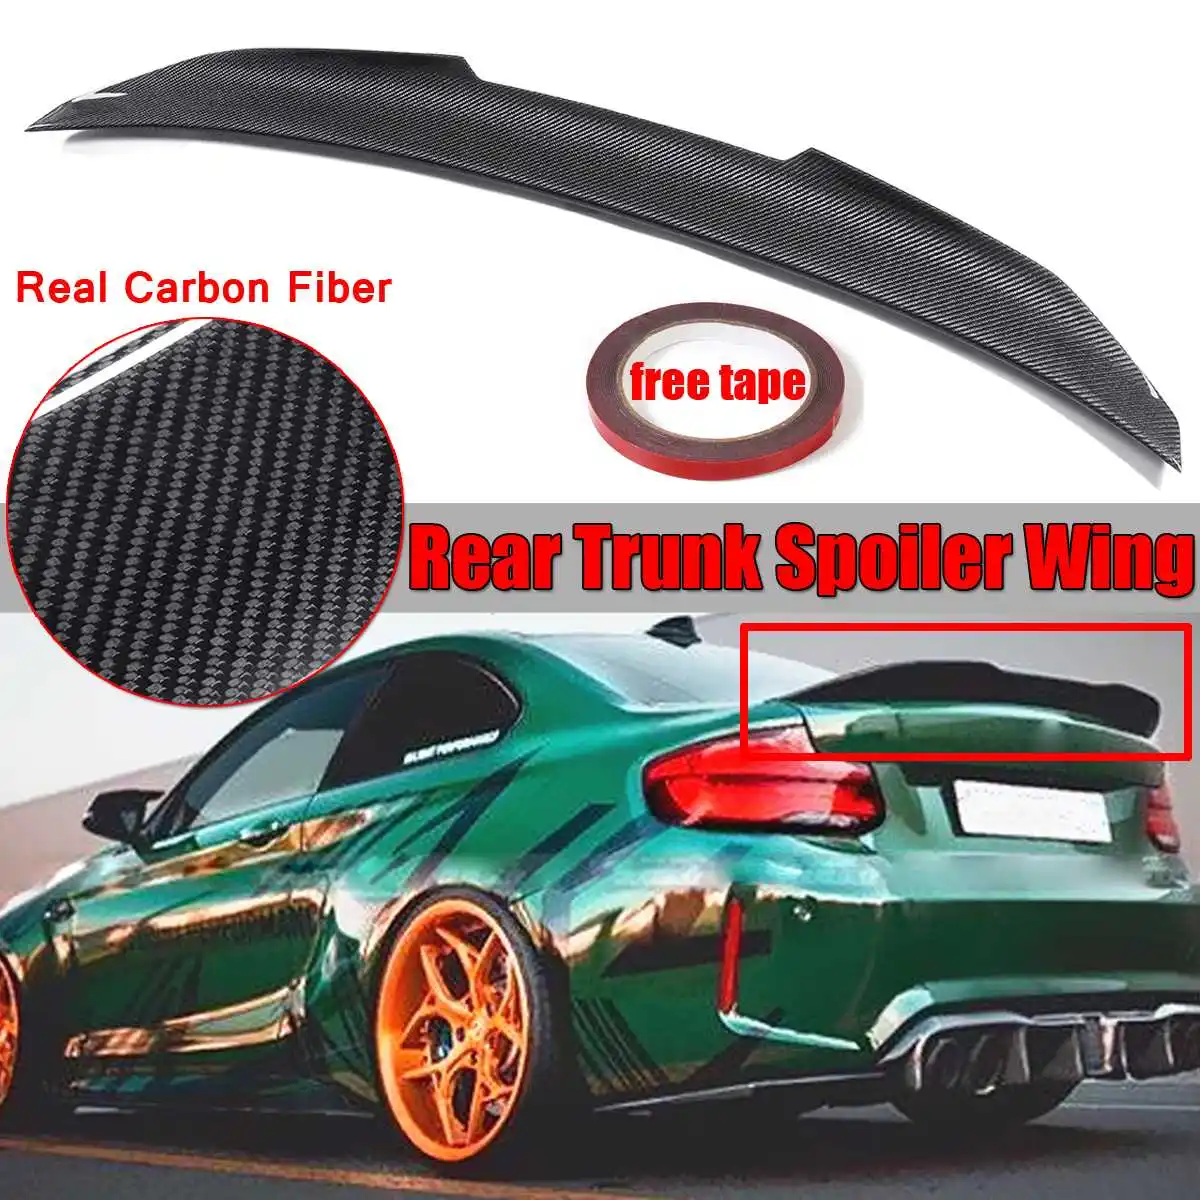 PSM Style Car Rear Trunk Spoiler Lip Boot Wing Lip Extension Real Carbon Fiber For BMW F22 M235i 2 Door Coupe F87 M2 2014-2021